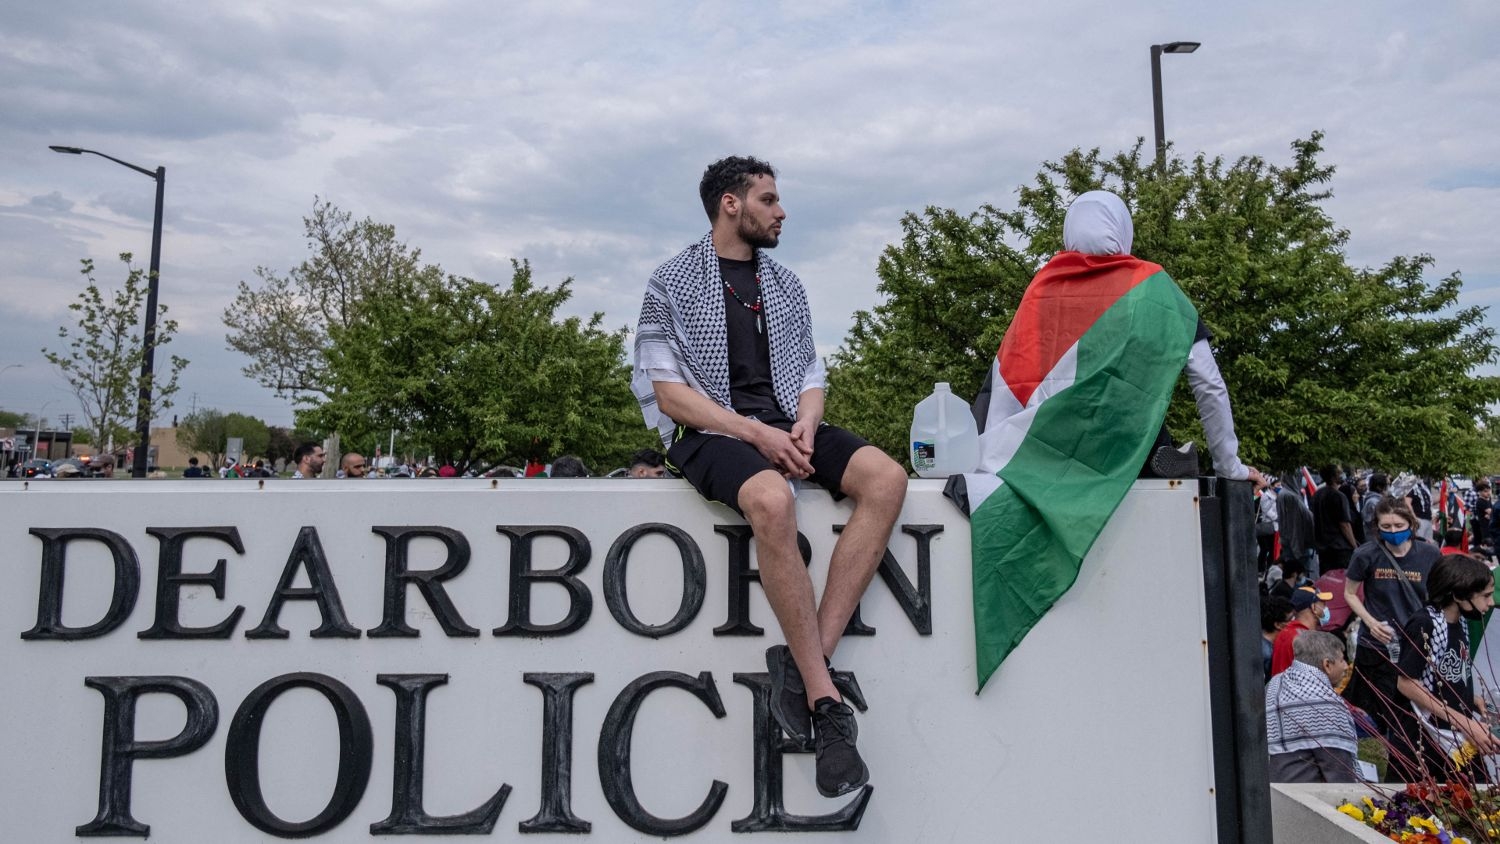 Hundreds of residents of Dearborn, Michigan gather outside of the Dearborn police department on 15 May 2021 to protest the actions of the Israeli army in Gaza.